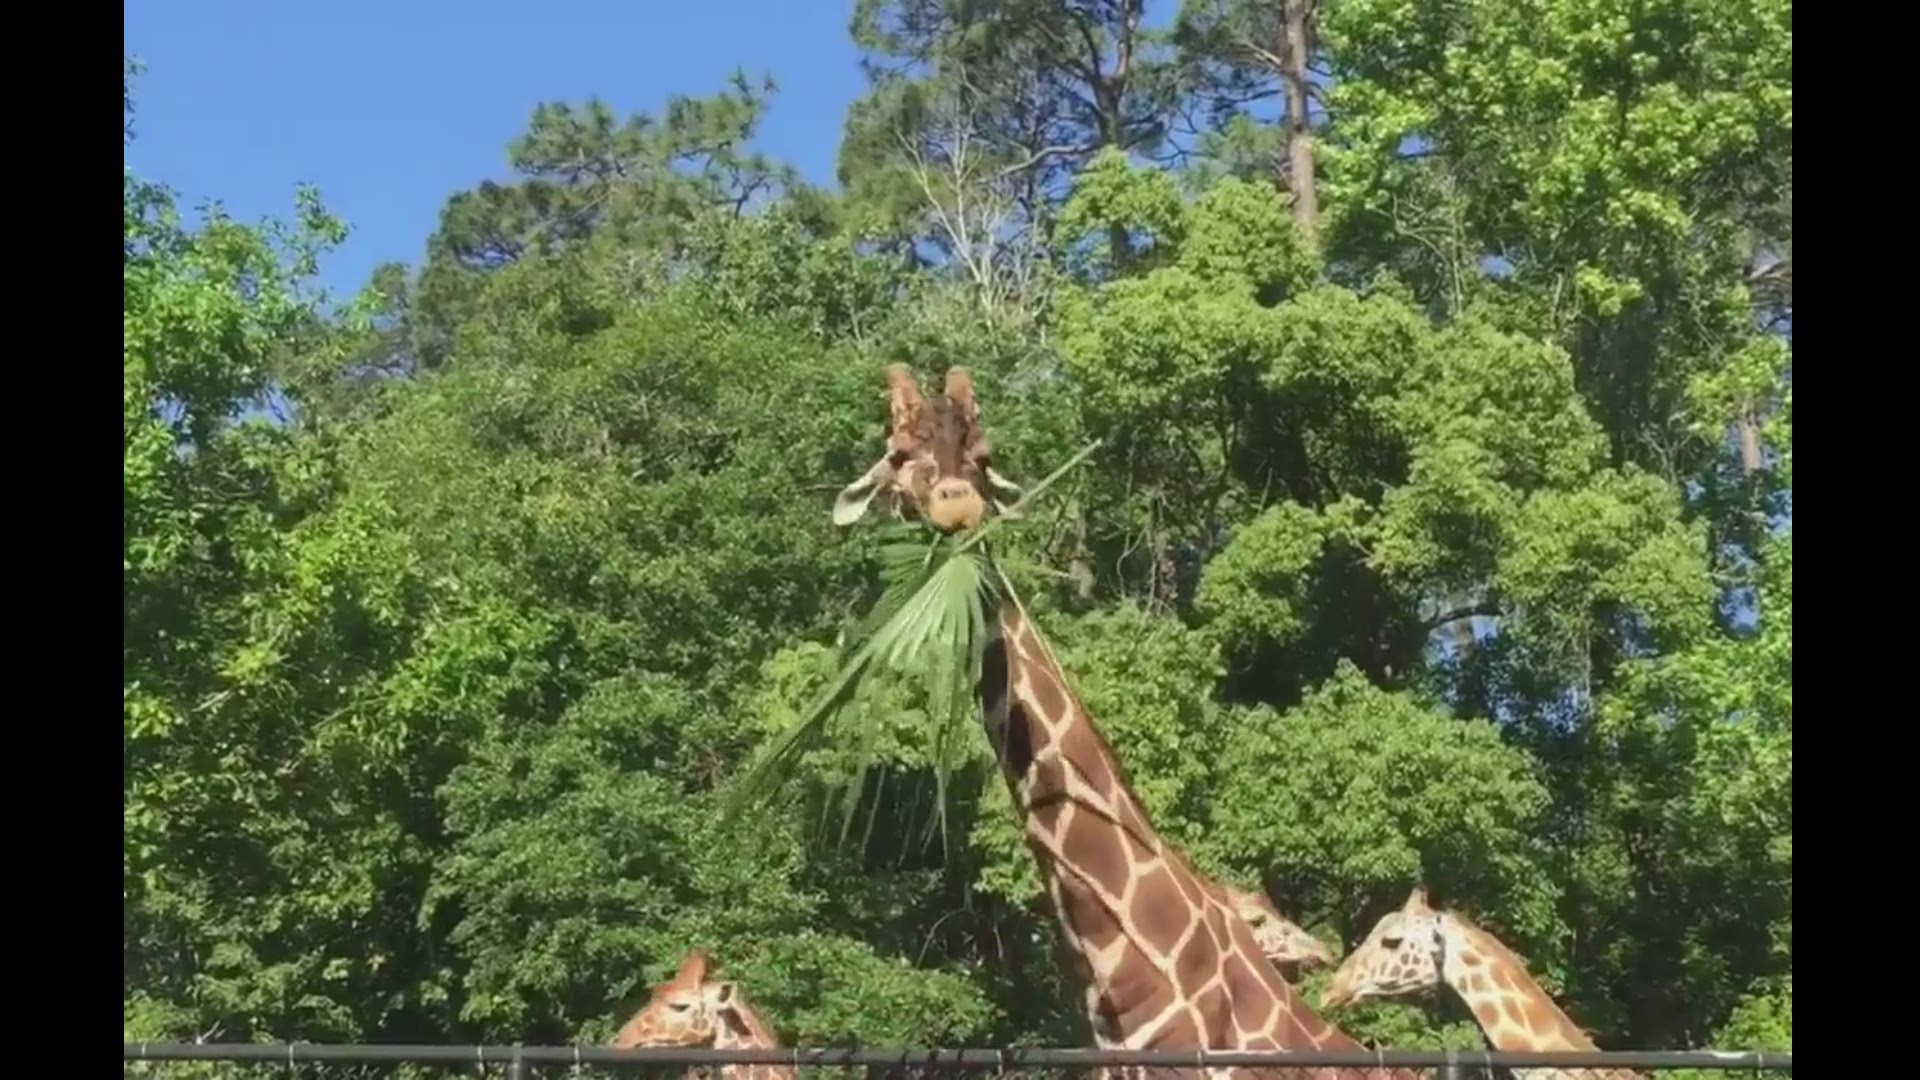 The Jacksonville Zoo and Gardens is in mourning after the loss of one of its most beloved animals Duke, the 21-year-old giraffe. Here's a happy video of Duke in action!